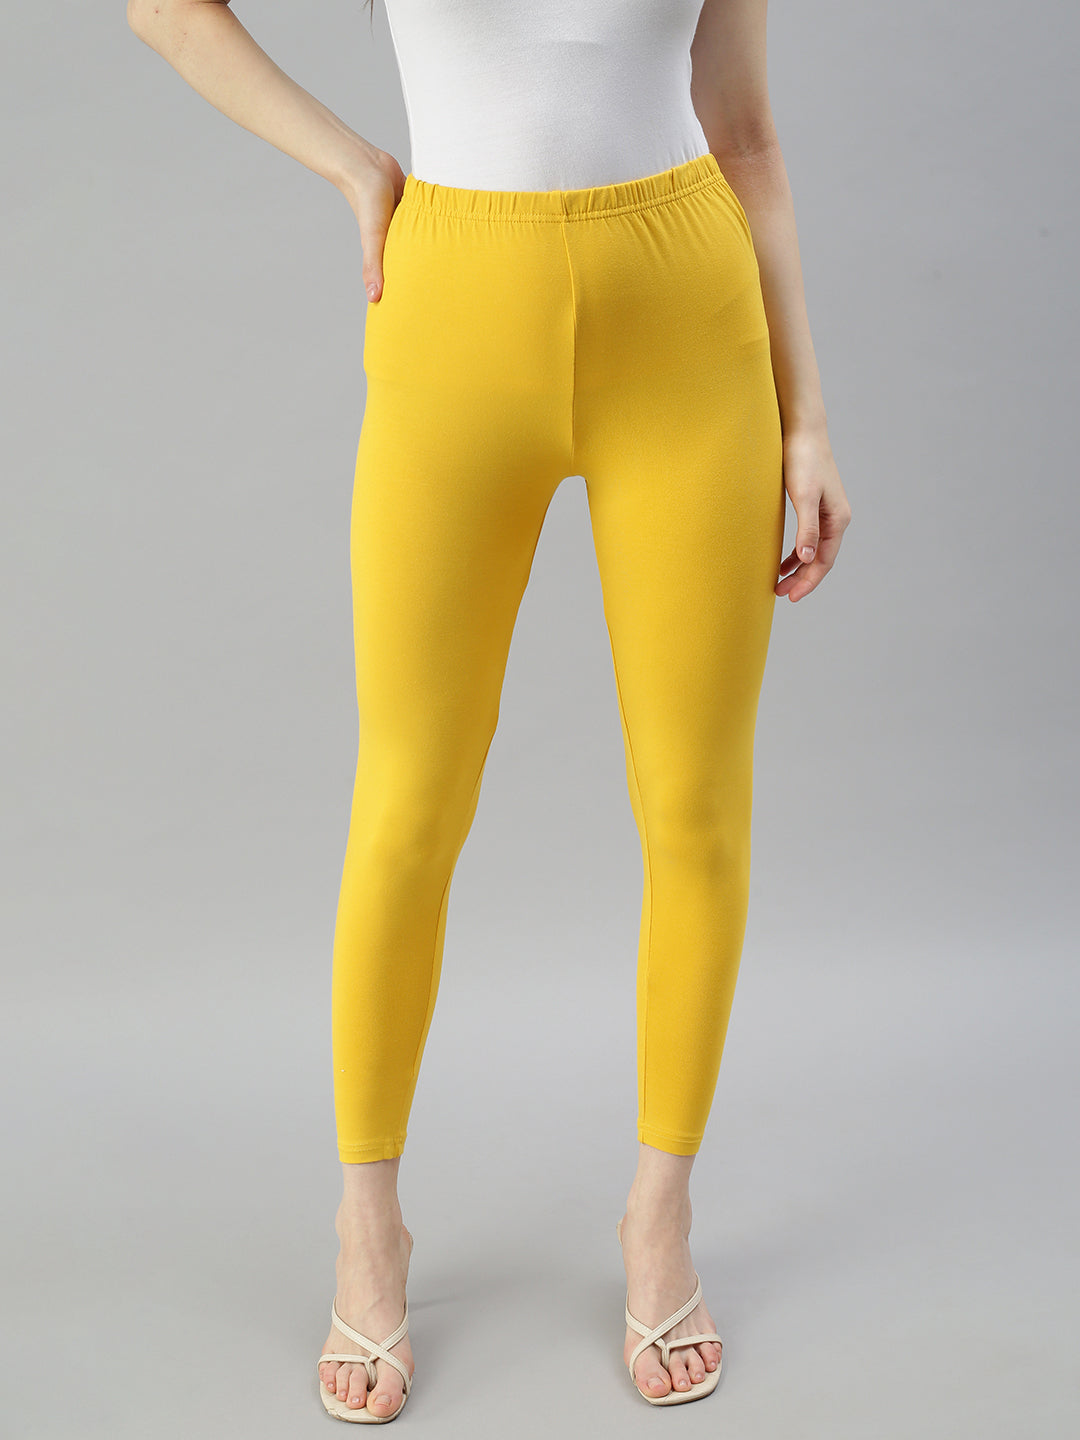 Prisma Gold Ankle Leggings for Women - Comfortable Fit